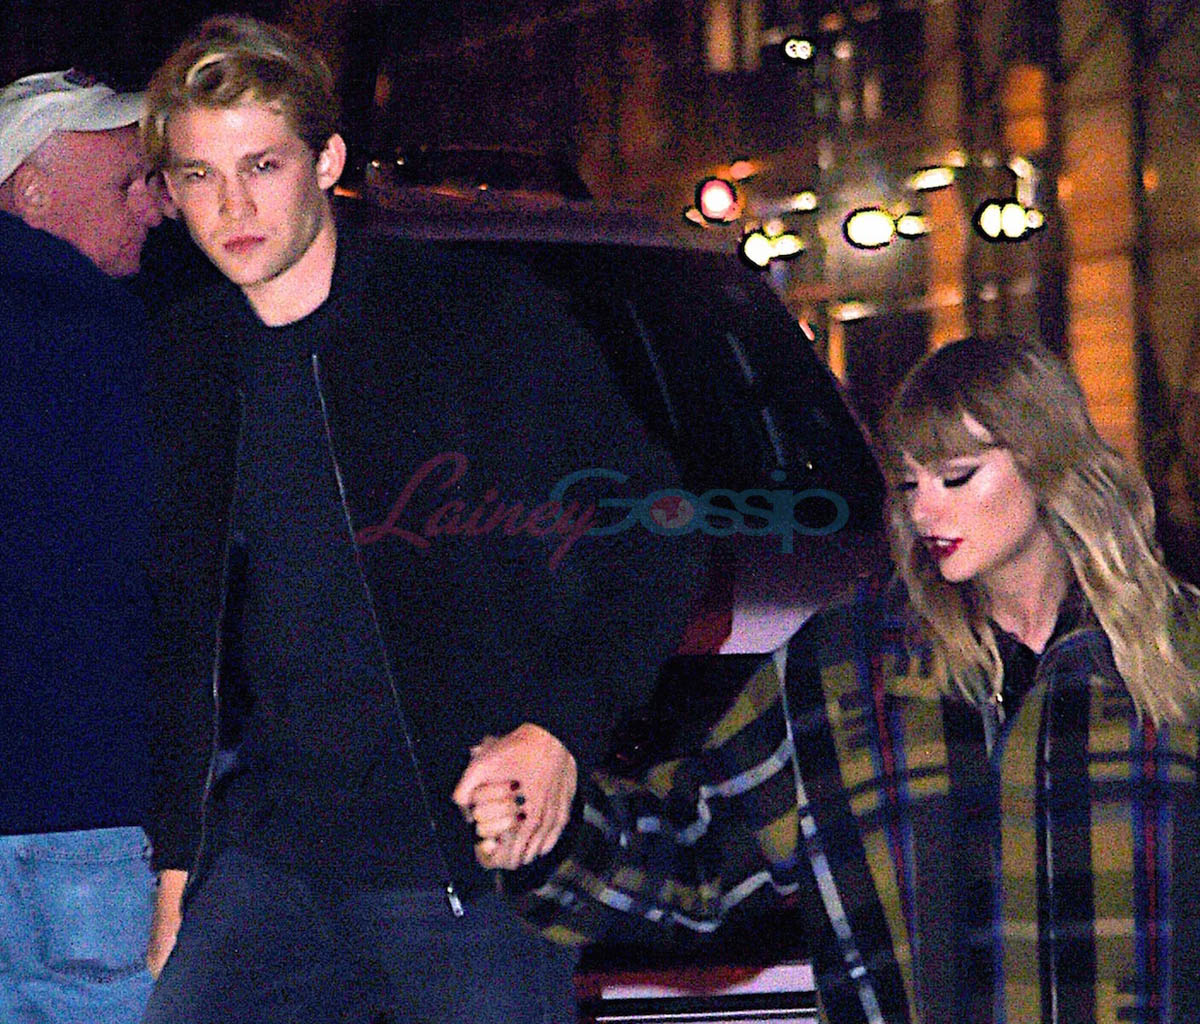 Joe Alwyn watches Taylor Swift perform and is photographed holding hands